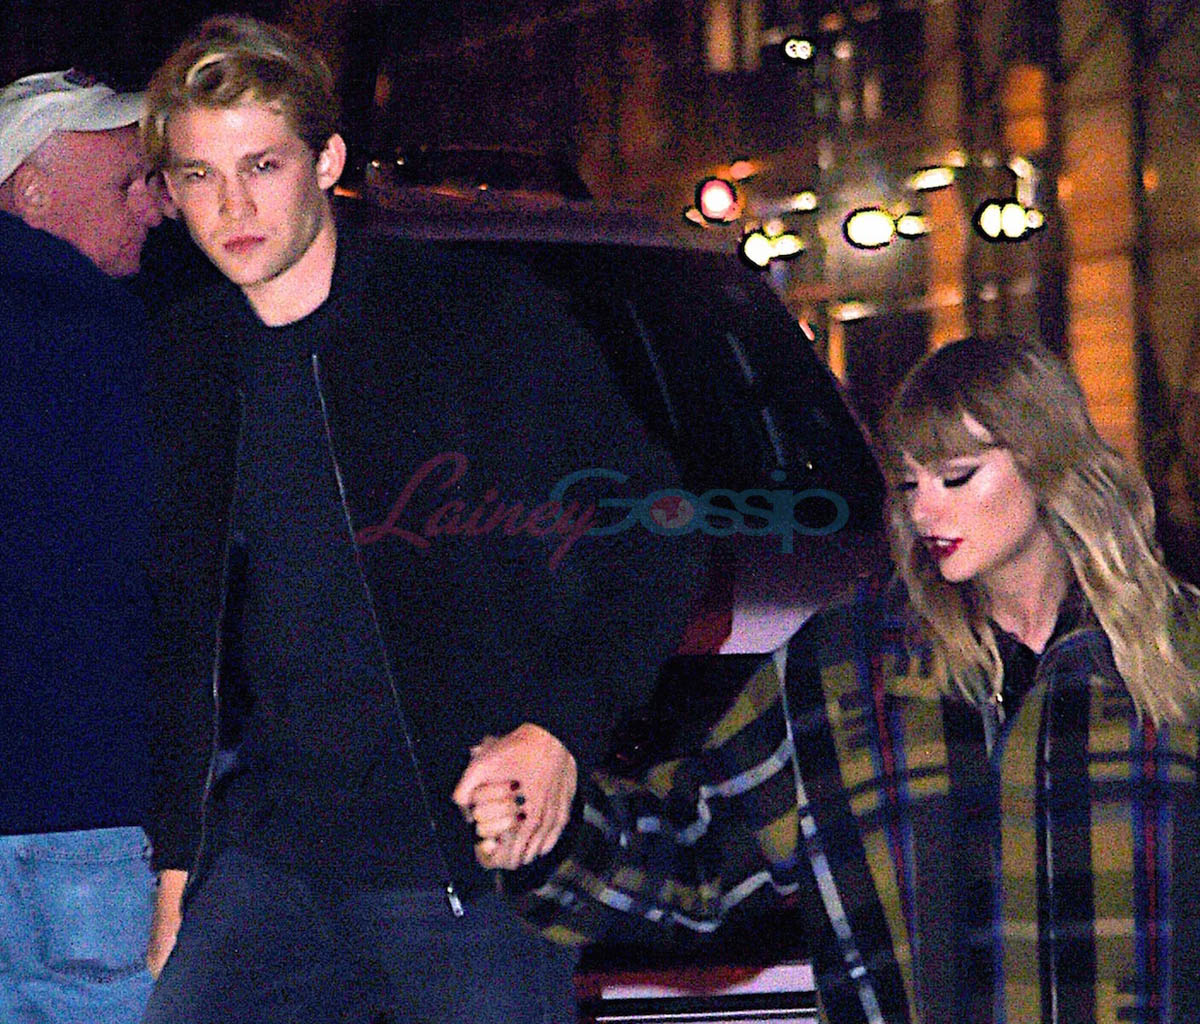 Joe Alwyn watches Taylor Swift perform and is photographed holding hands